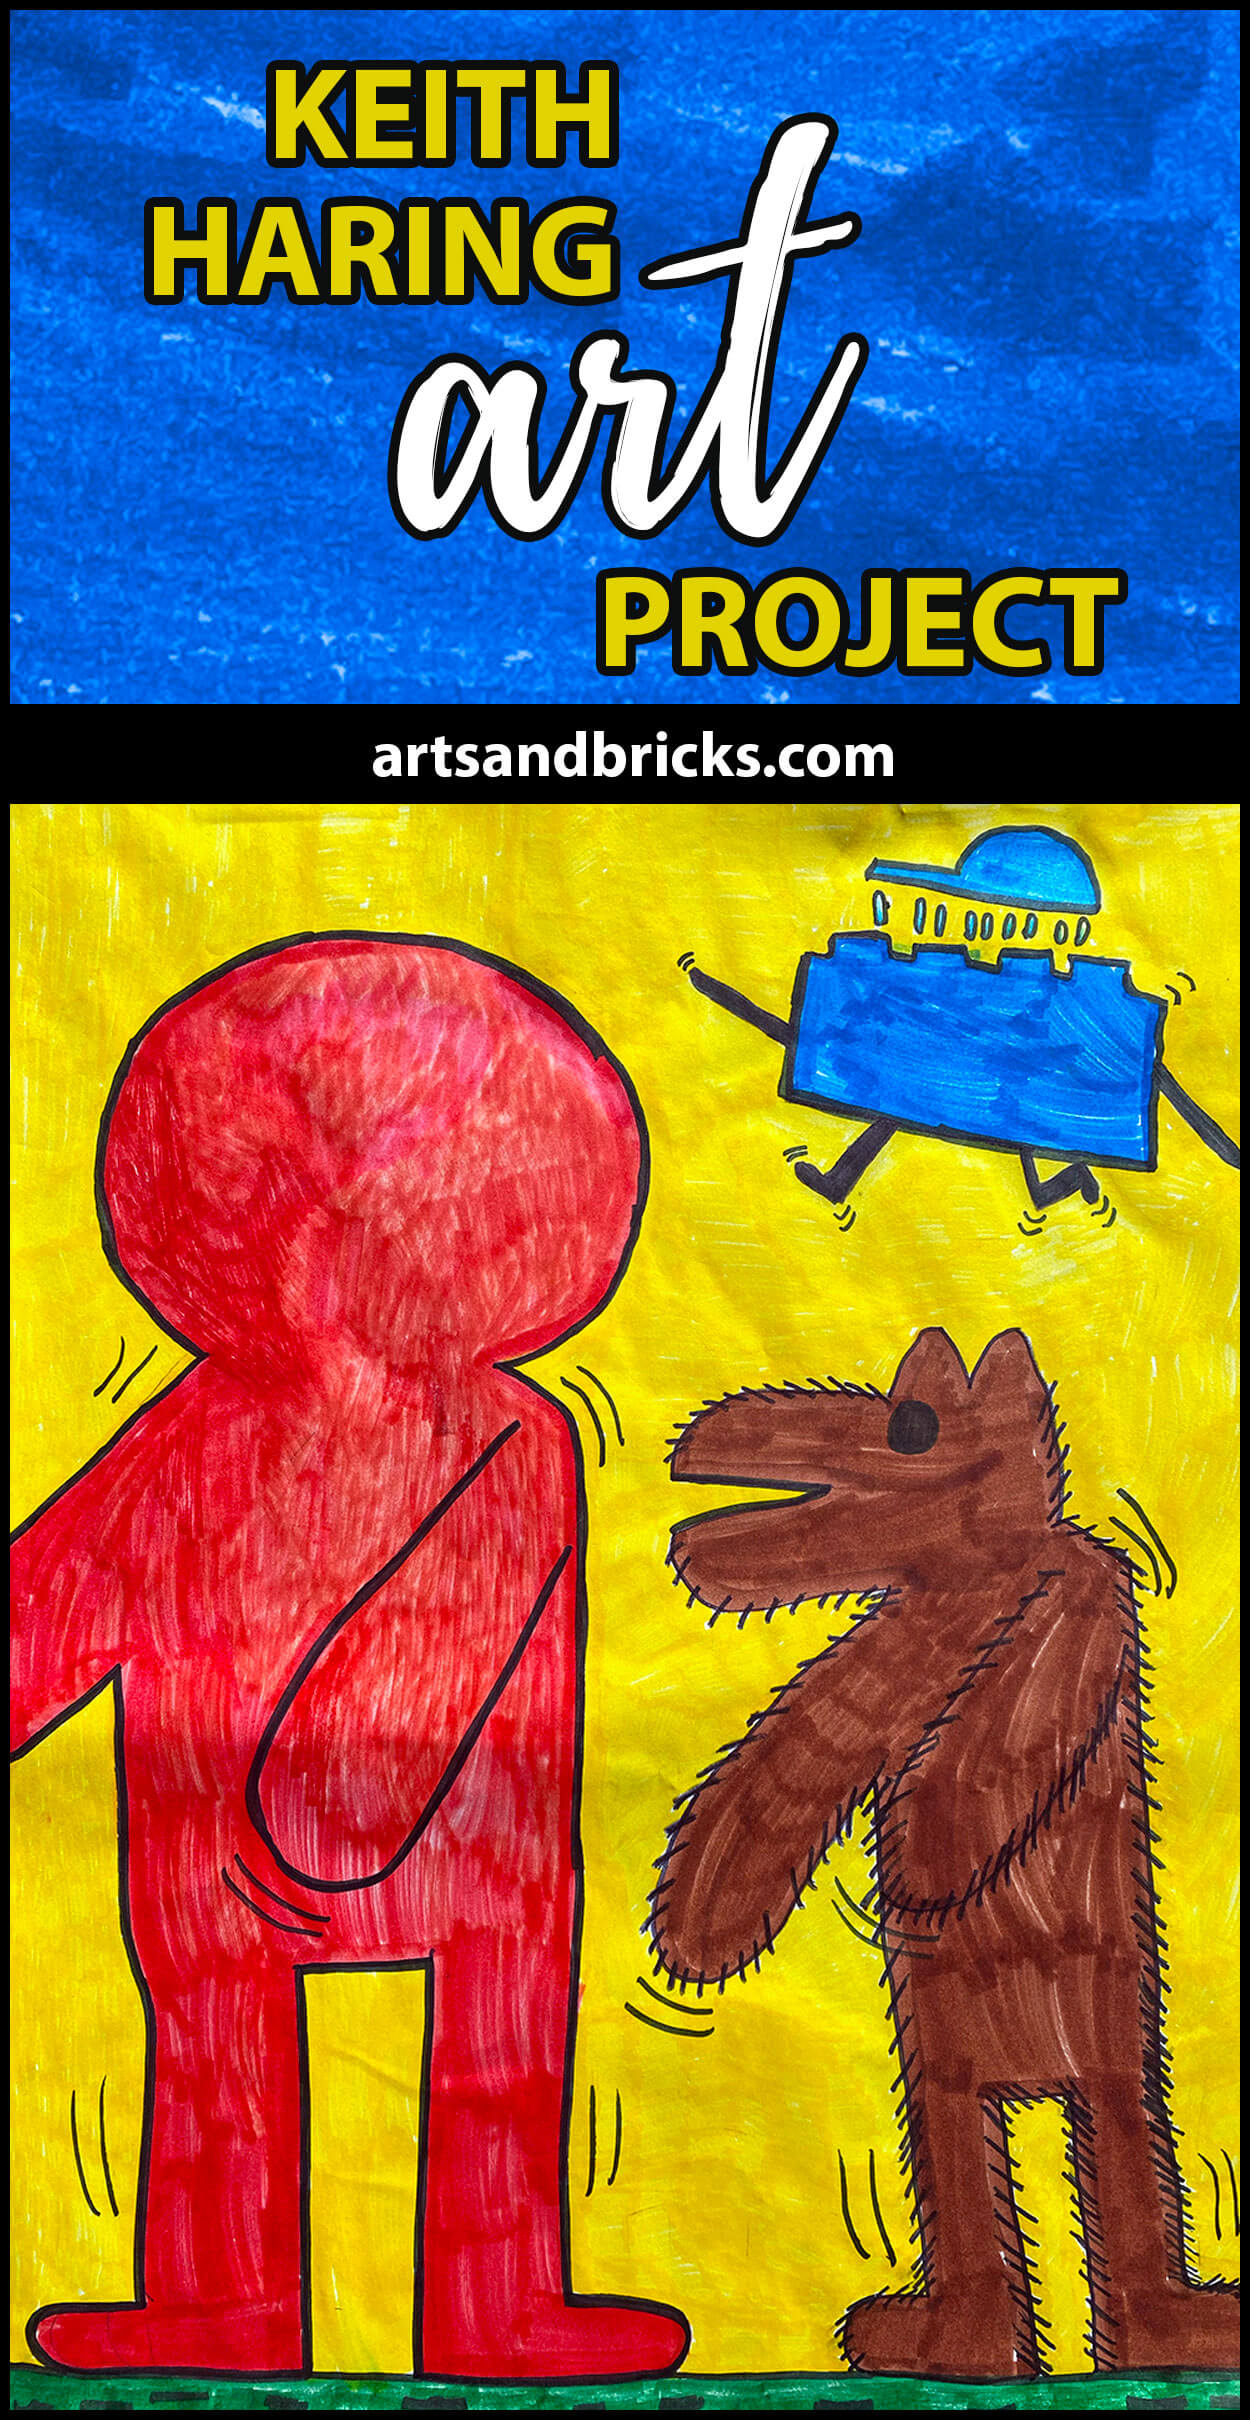 Explore this idea on how to make your own Keith Haring-inspired Kids Art Project. Learn what characteristics make Keith's work unique -- like motion lines, bright solid colors and cartoon styled faceless people. Our final artwork includes our very own The Hairy Dog, The Dancing Boy and The Blue Lego Brick. #keithharing #art #artclassroom #lego